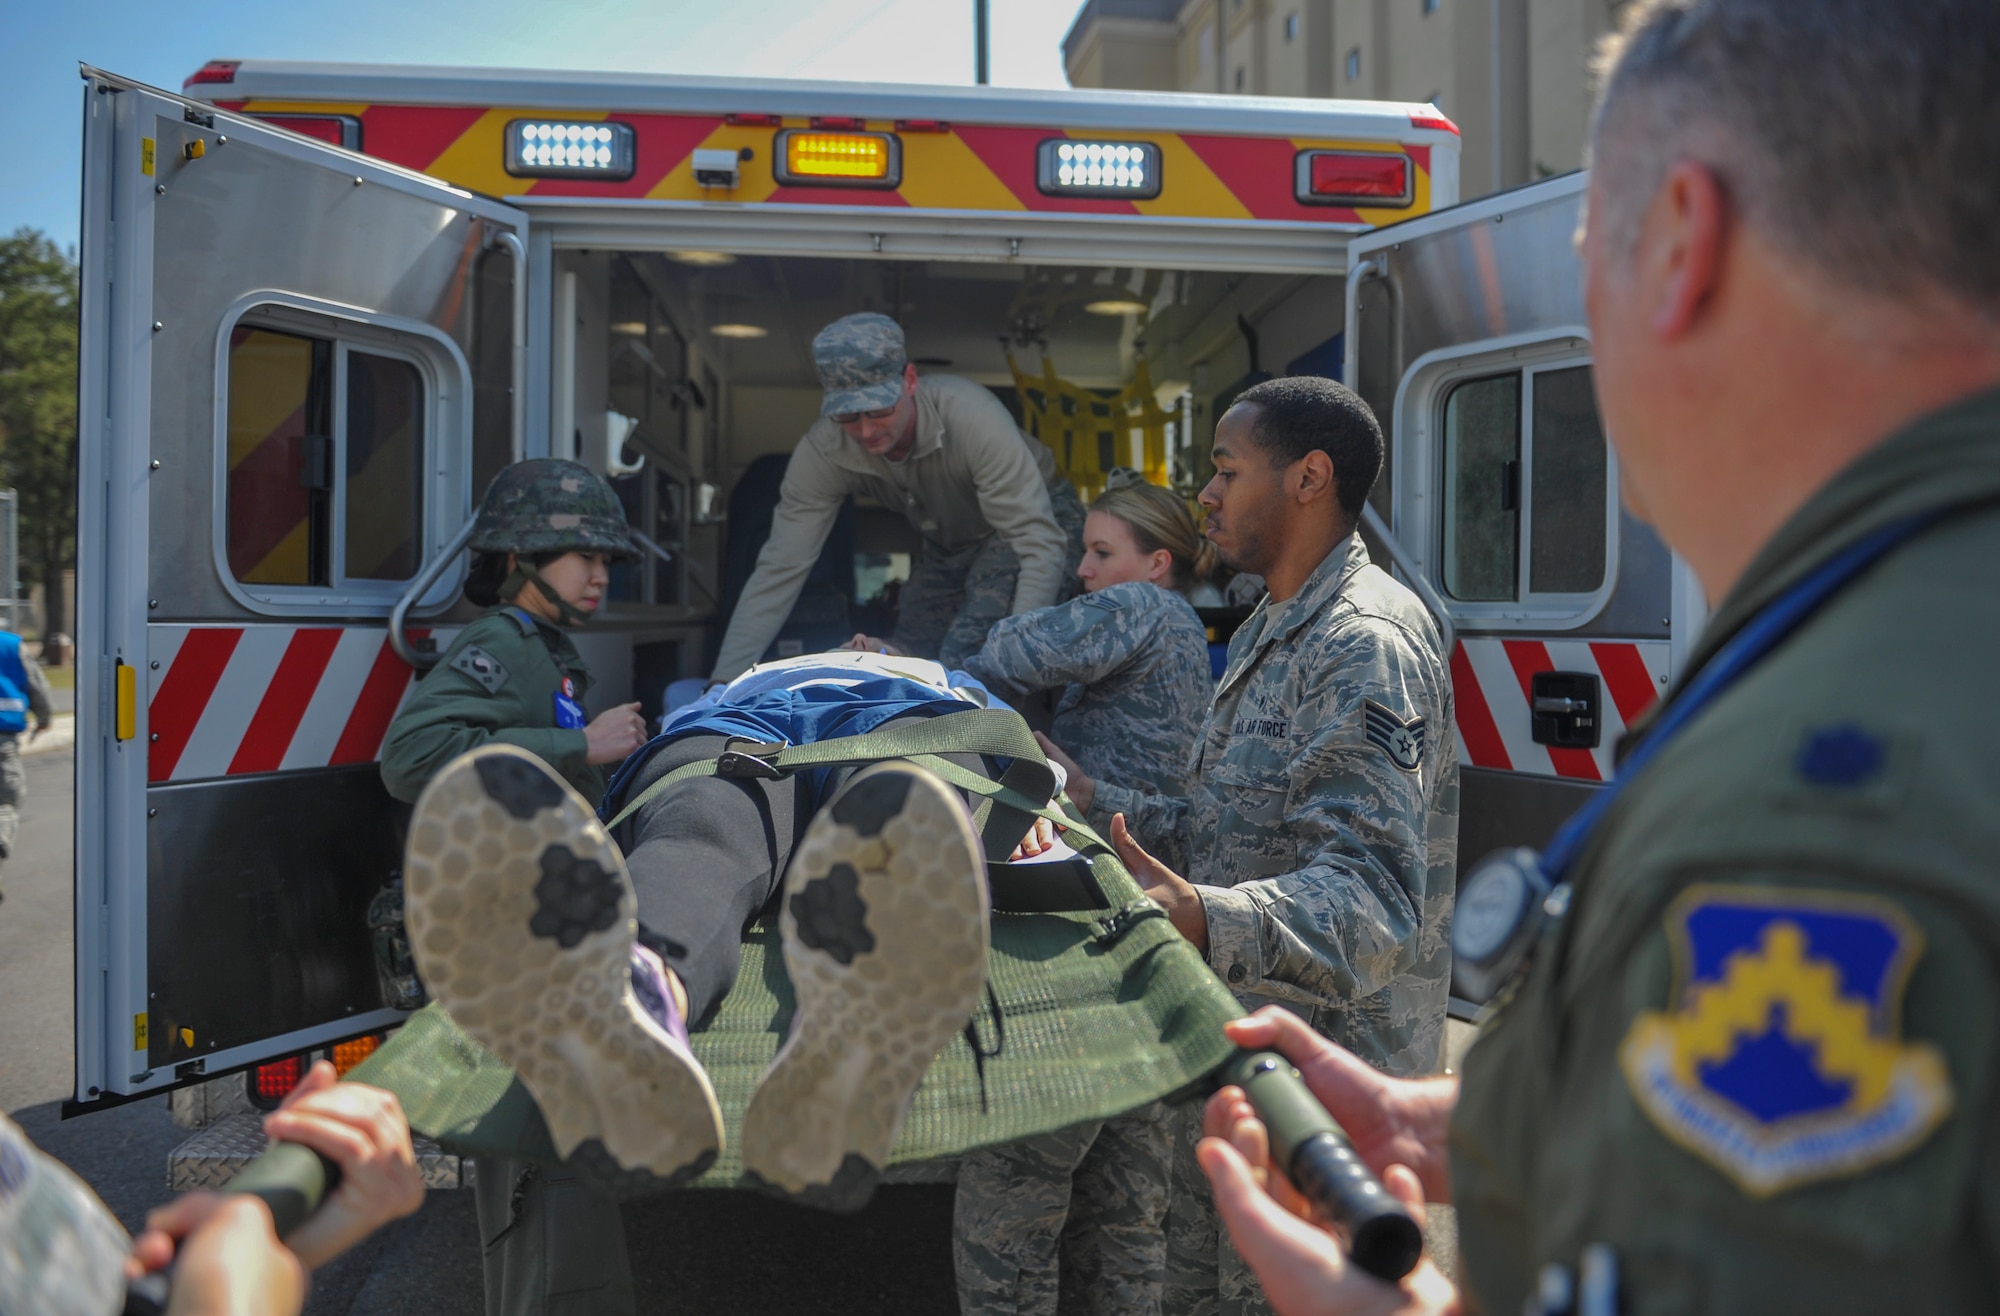 United States Air Force members assigned to the 8th Medical Group and Republic of Korea Air Force medical airmen work together to lift an airman into an ambulance during a mass casualty exercise at Kunsan Air Base, Republic of Korea, April 19, 2017. U.S. and ROK airmen conducted the training to evaluate their ability to communicate and operate through a MASCAL situation. (U.S. Air Force photo by Senior Airman Colville McFee/Released)